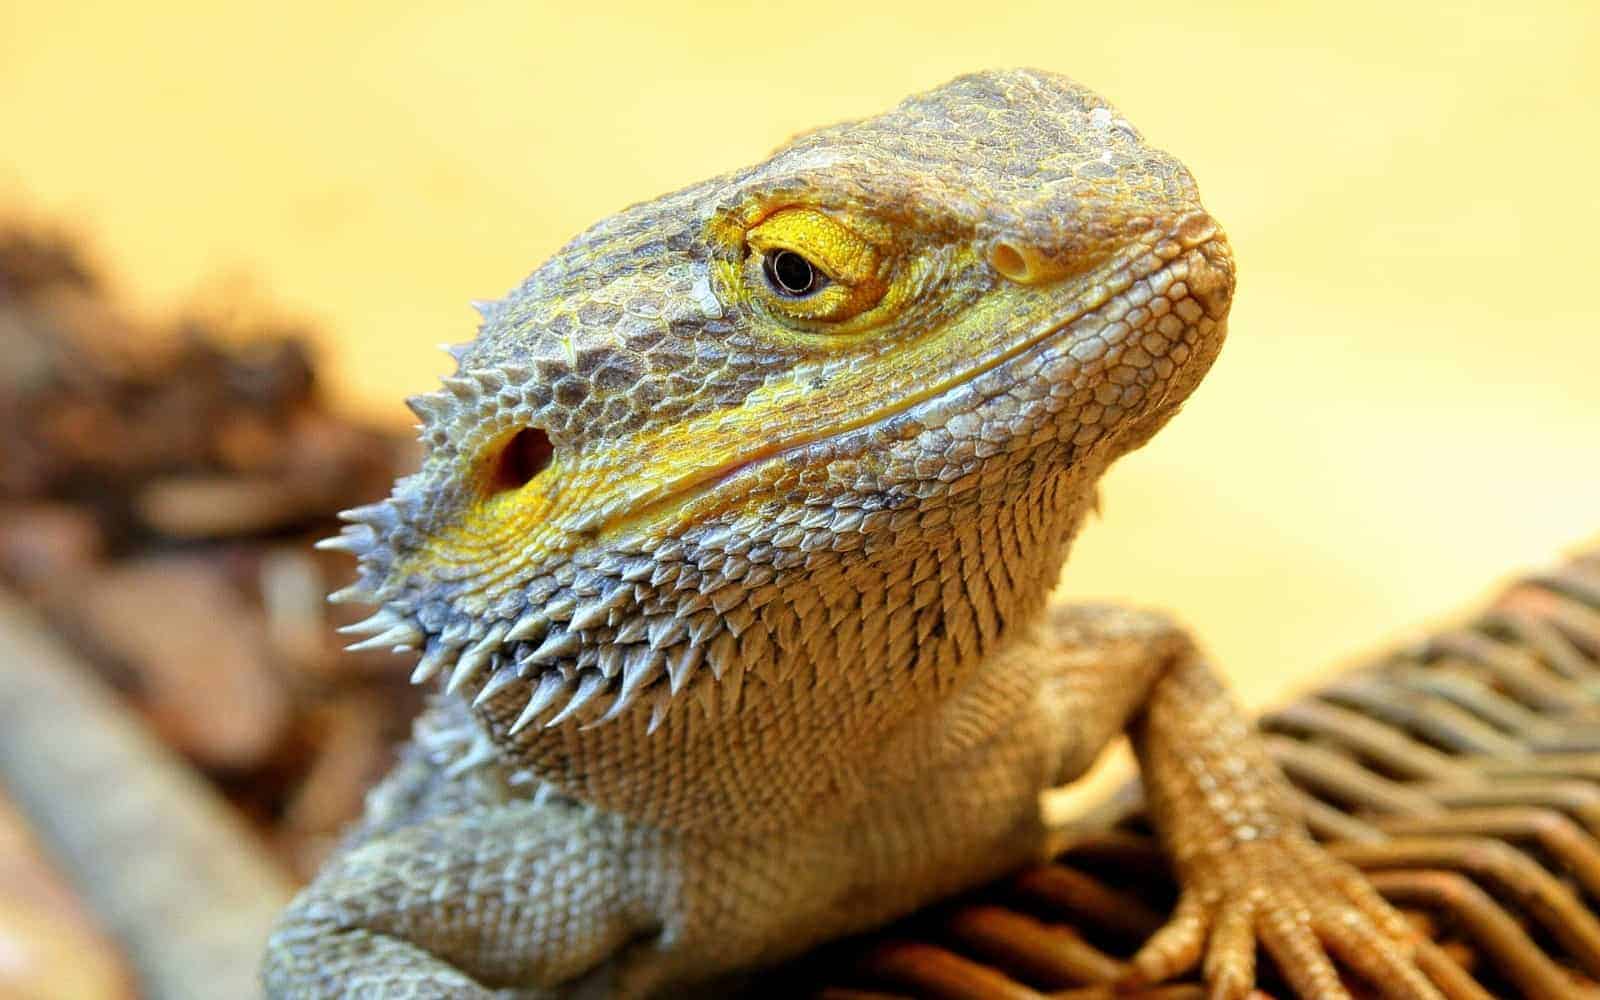 yellow bearded dragon seems like finding spring mix to eat